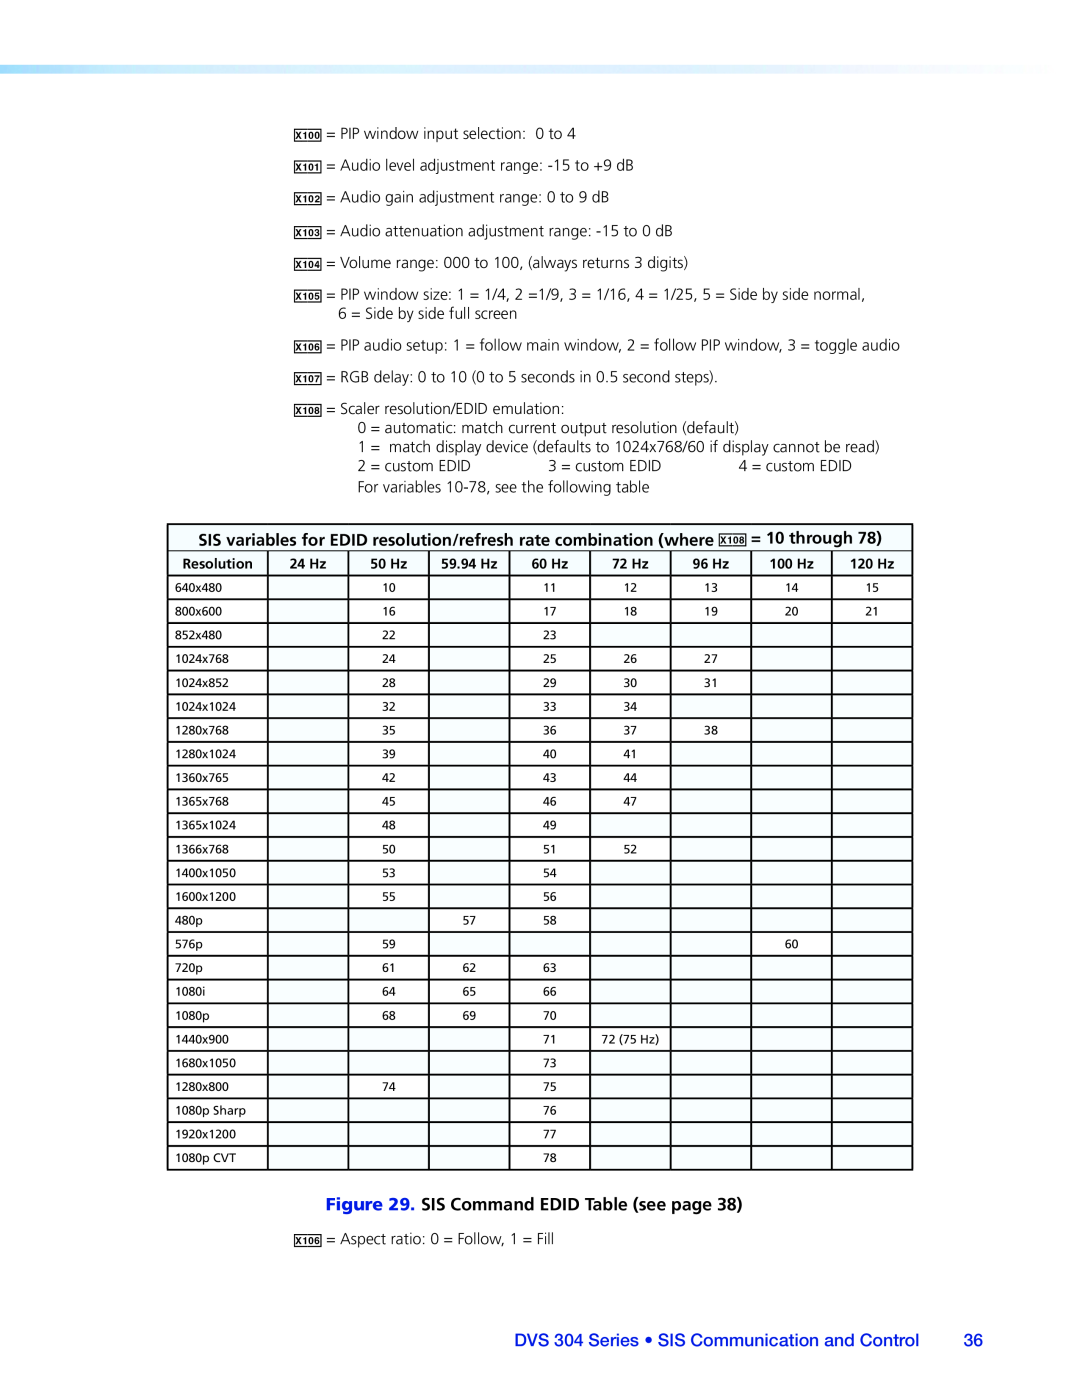 Extron electronic manual SIS Command EDID Table see page, DVS 304 Series • SIS Communication and Control 